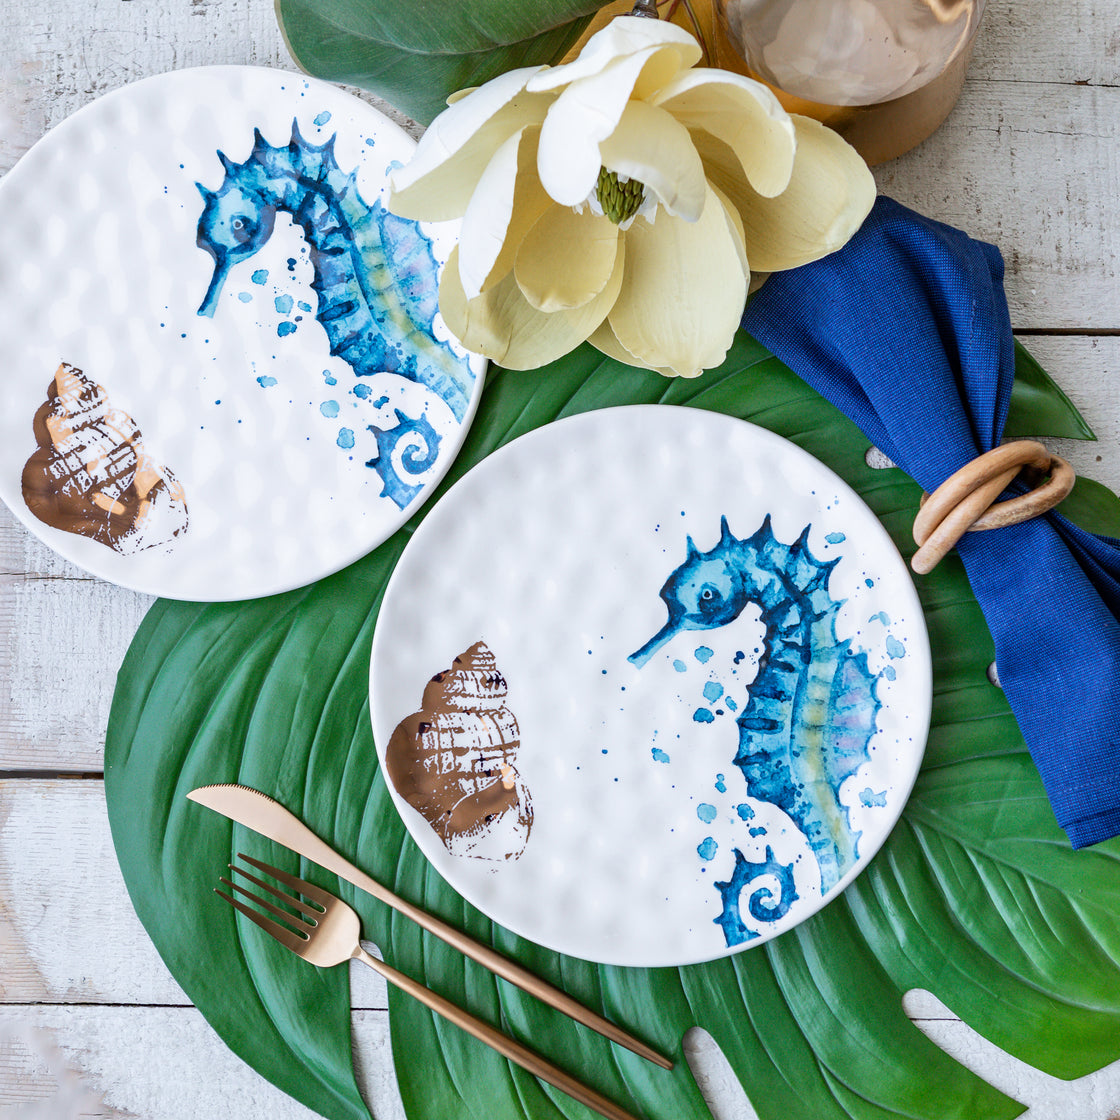 seahorse dessert plates on green leaf placemats on rustic table